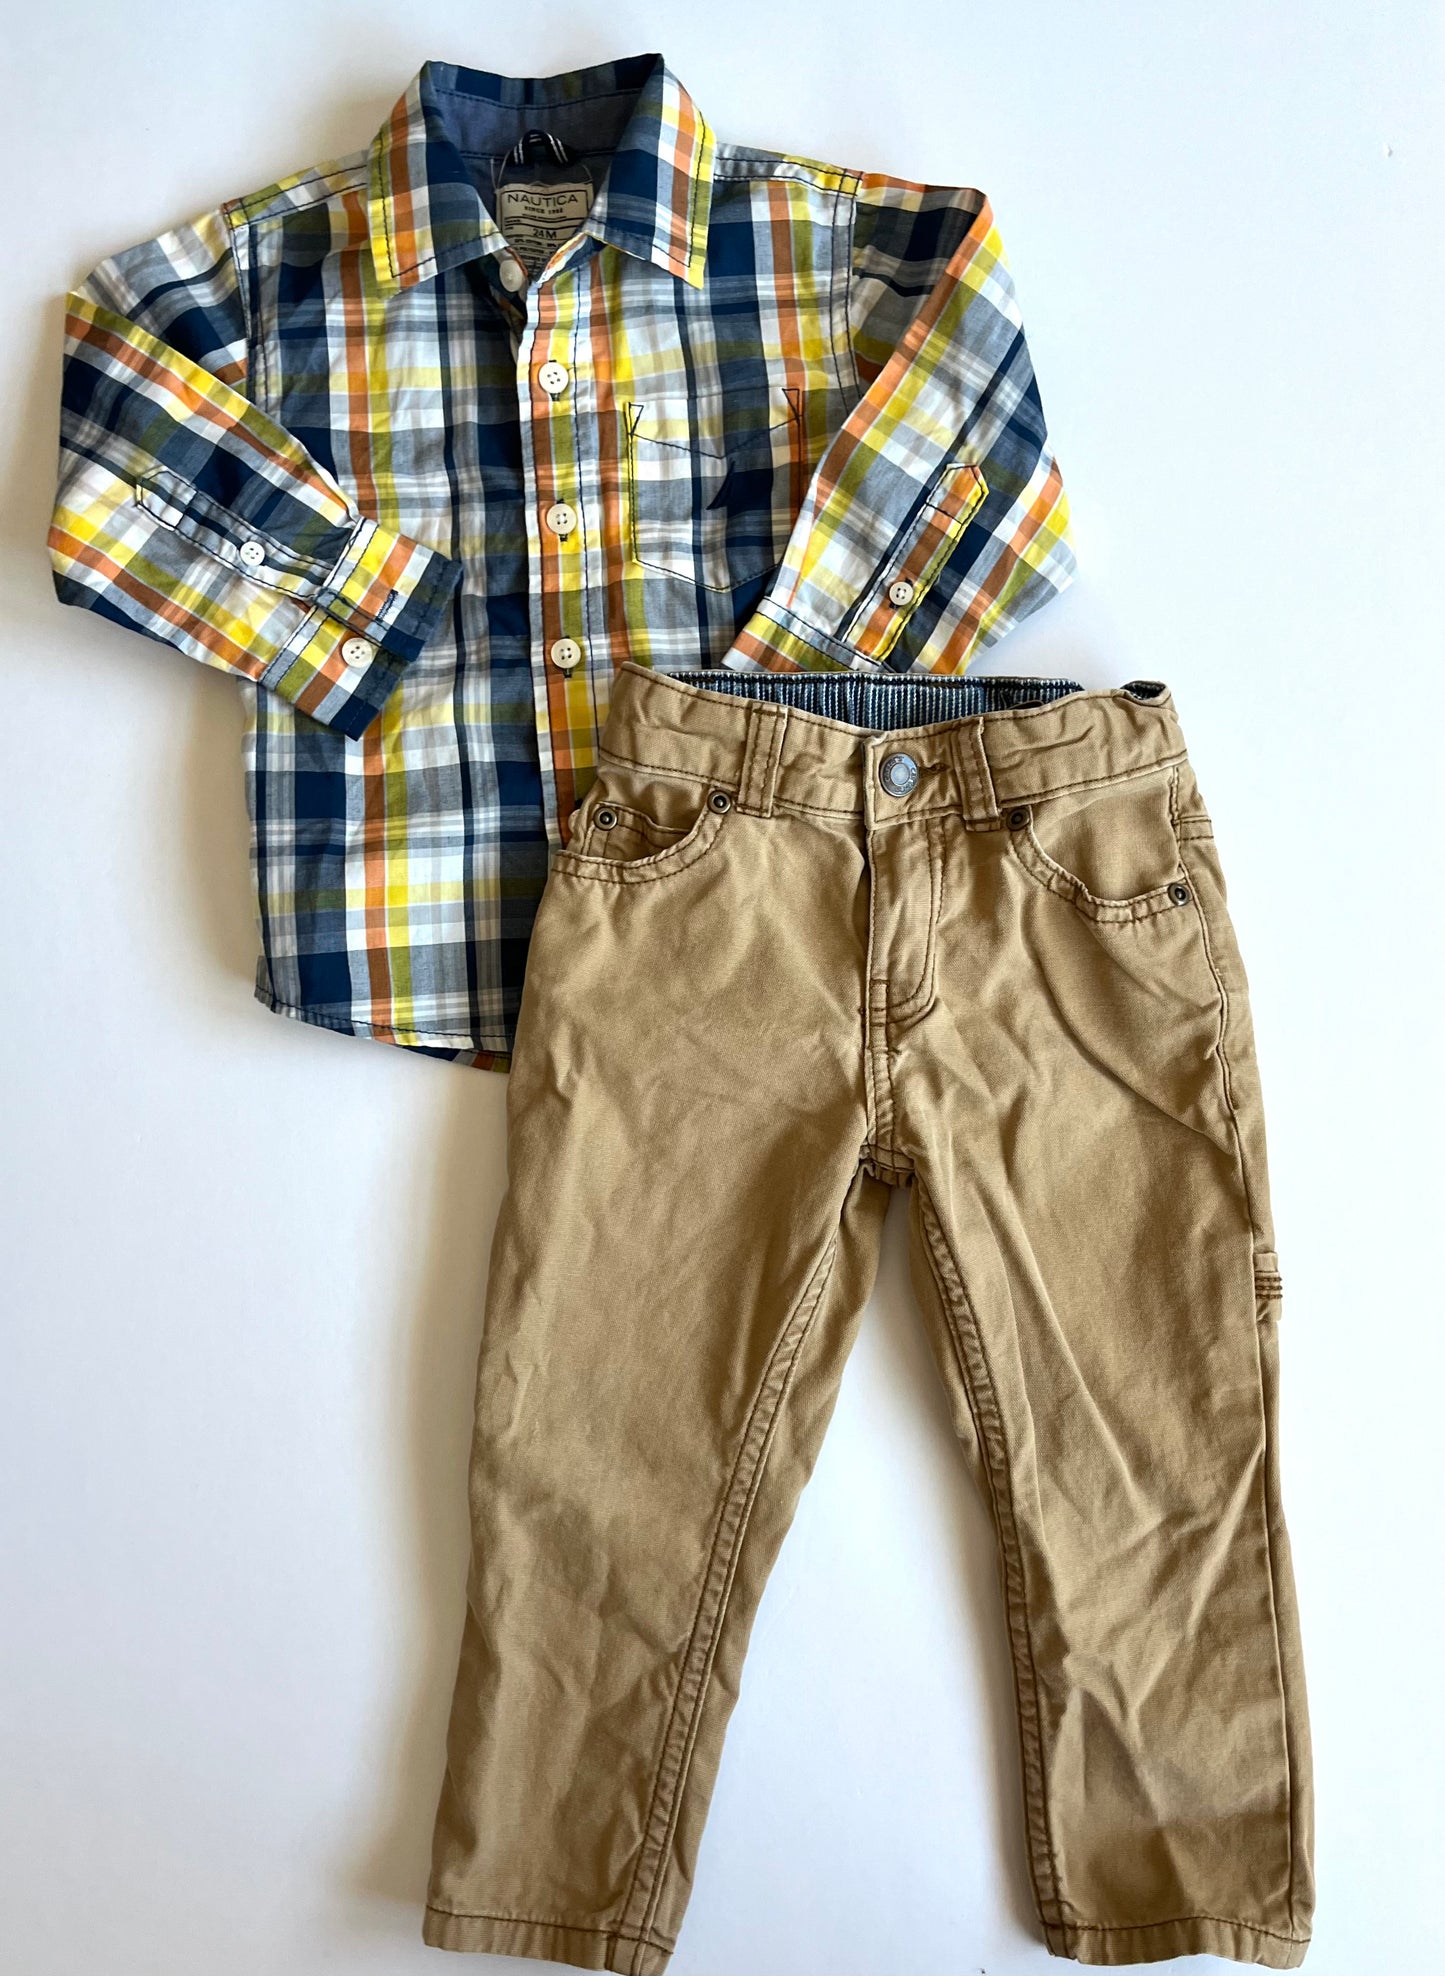 Boys 2t Carters outfit